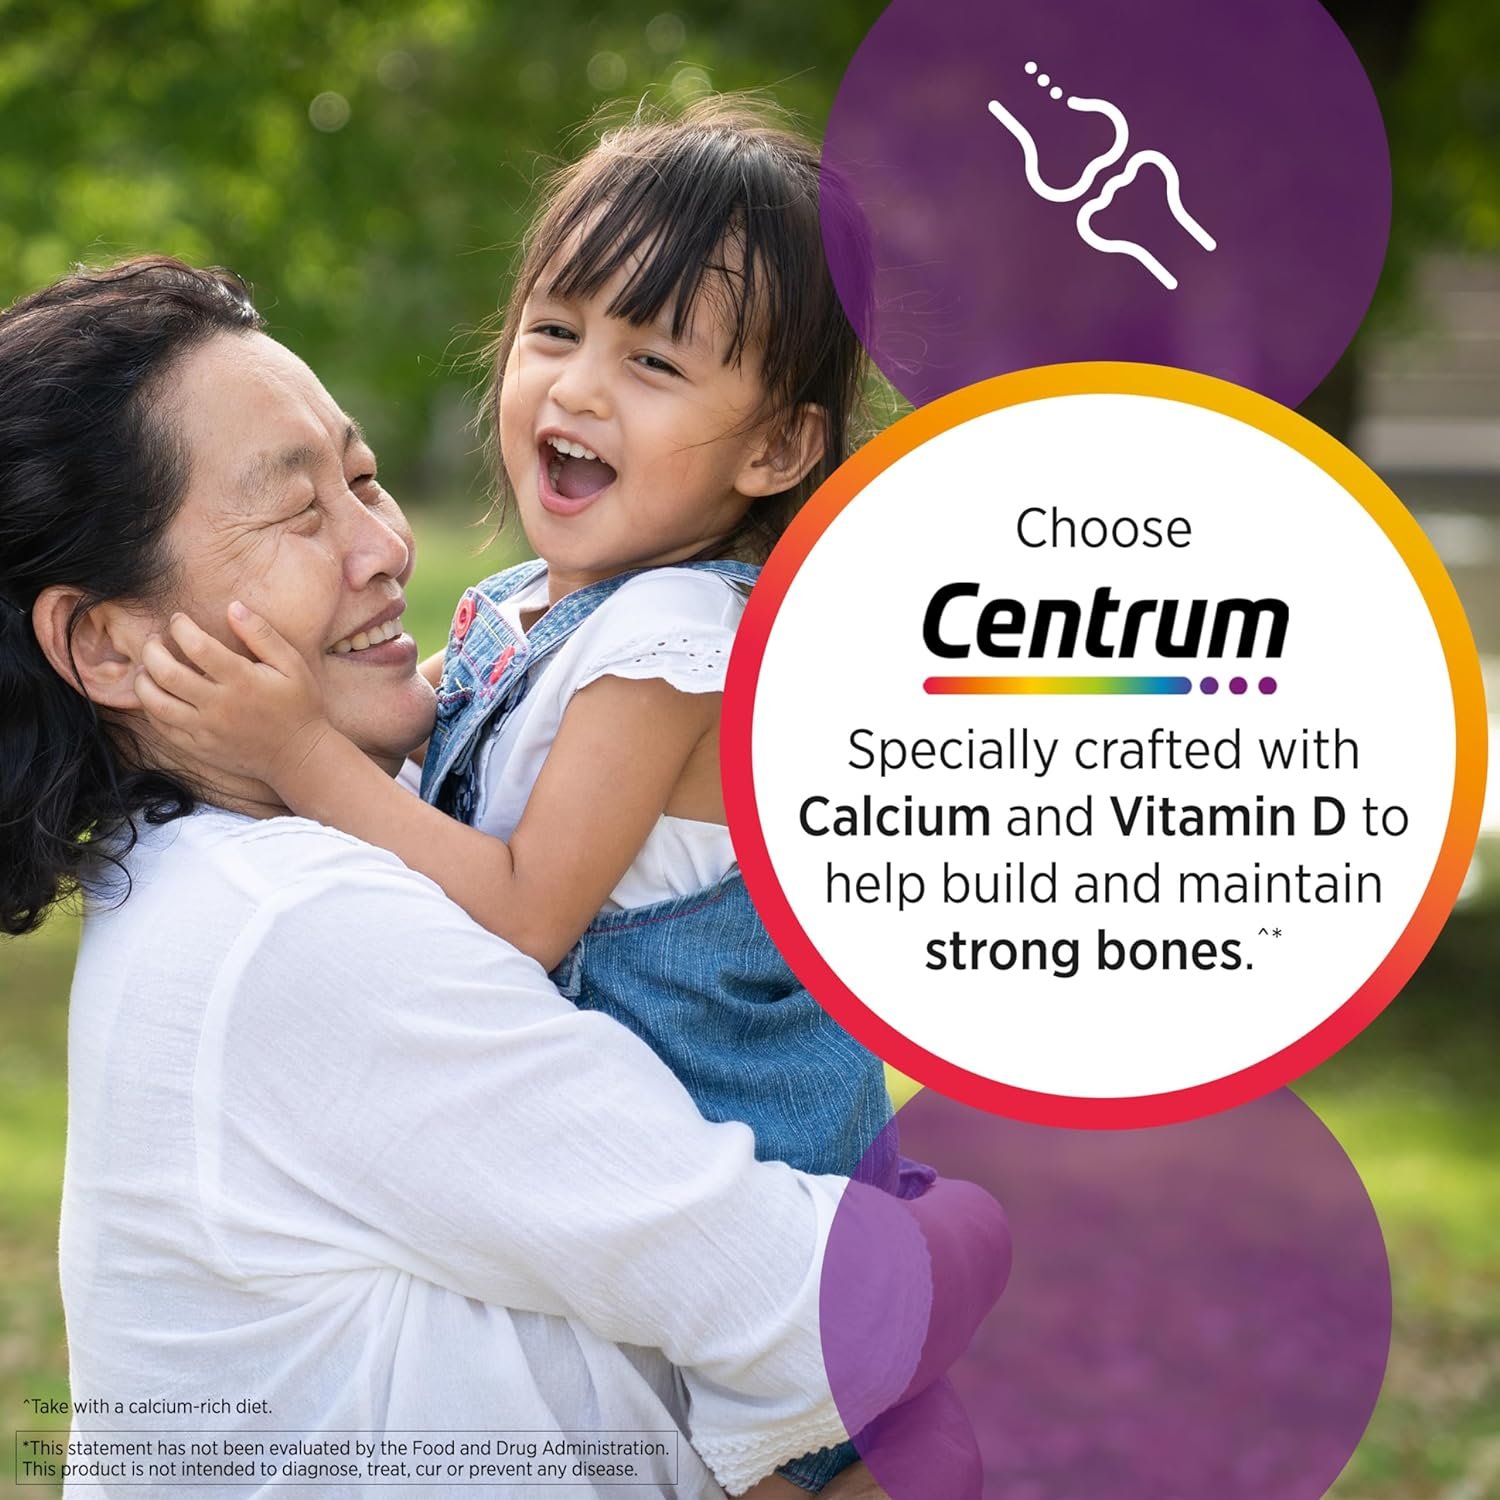 Centrum Minis Silver Womens Multivitamin for Women 50 Plus, Multimineral Supplement with Vitamin D3, B Vitamins, Non-GMO Ingredients, Supports Memory and Cognition in Older Adults - 280 Ct